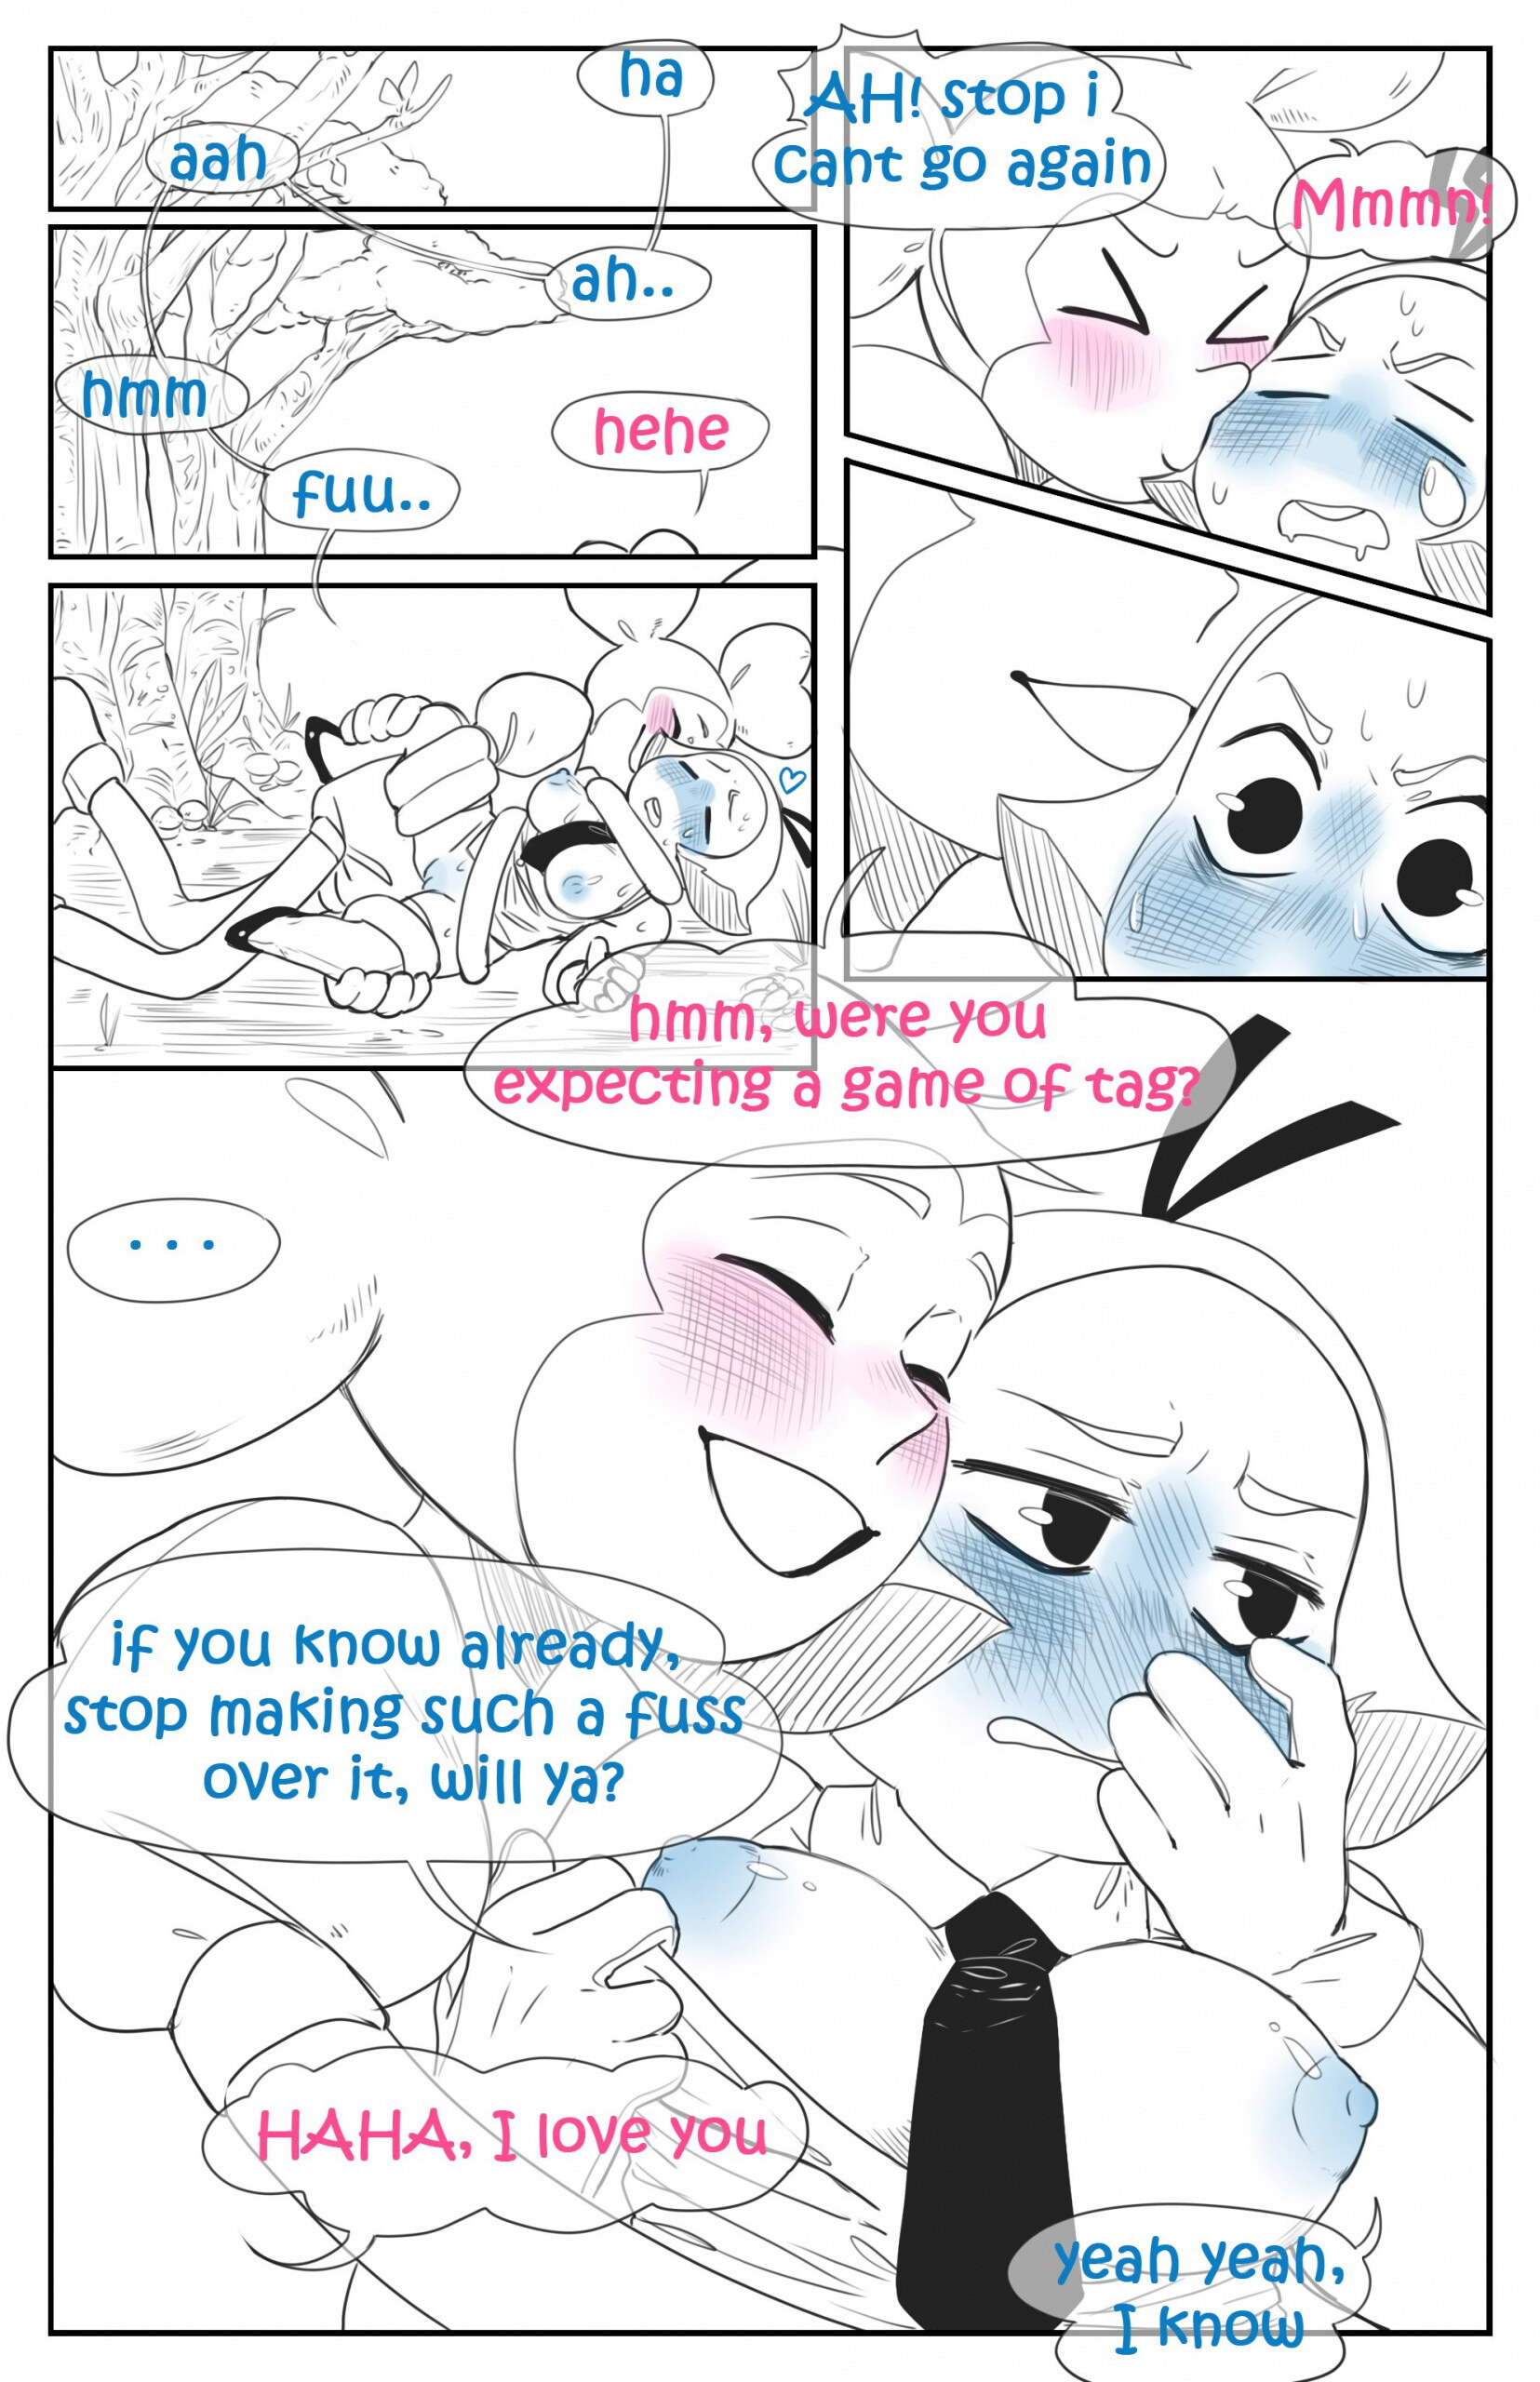 Tag, You're It! - Page 10